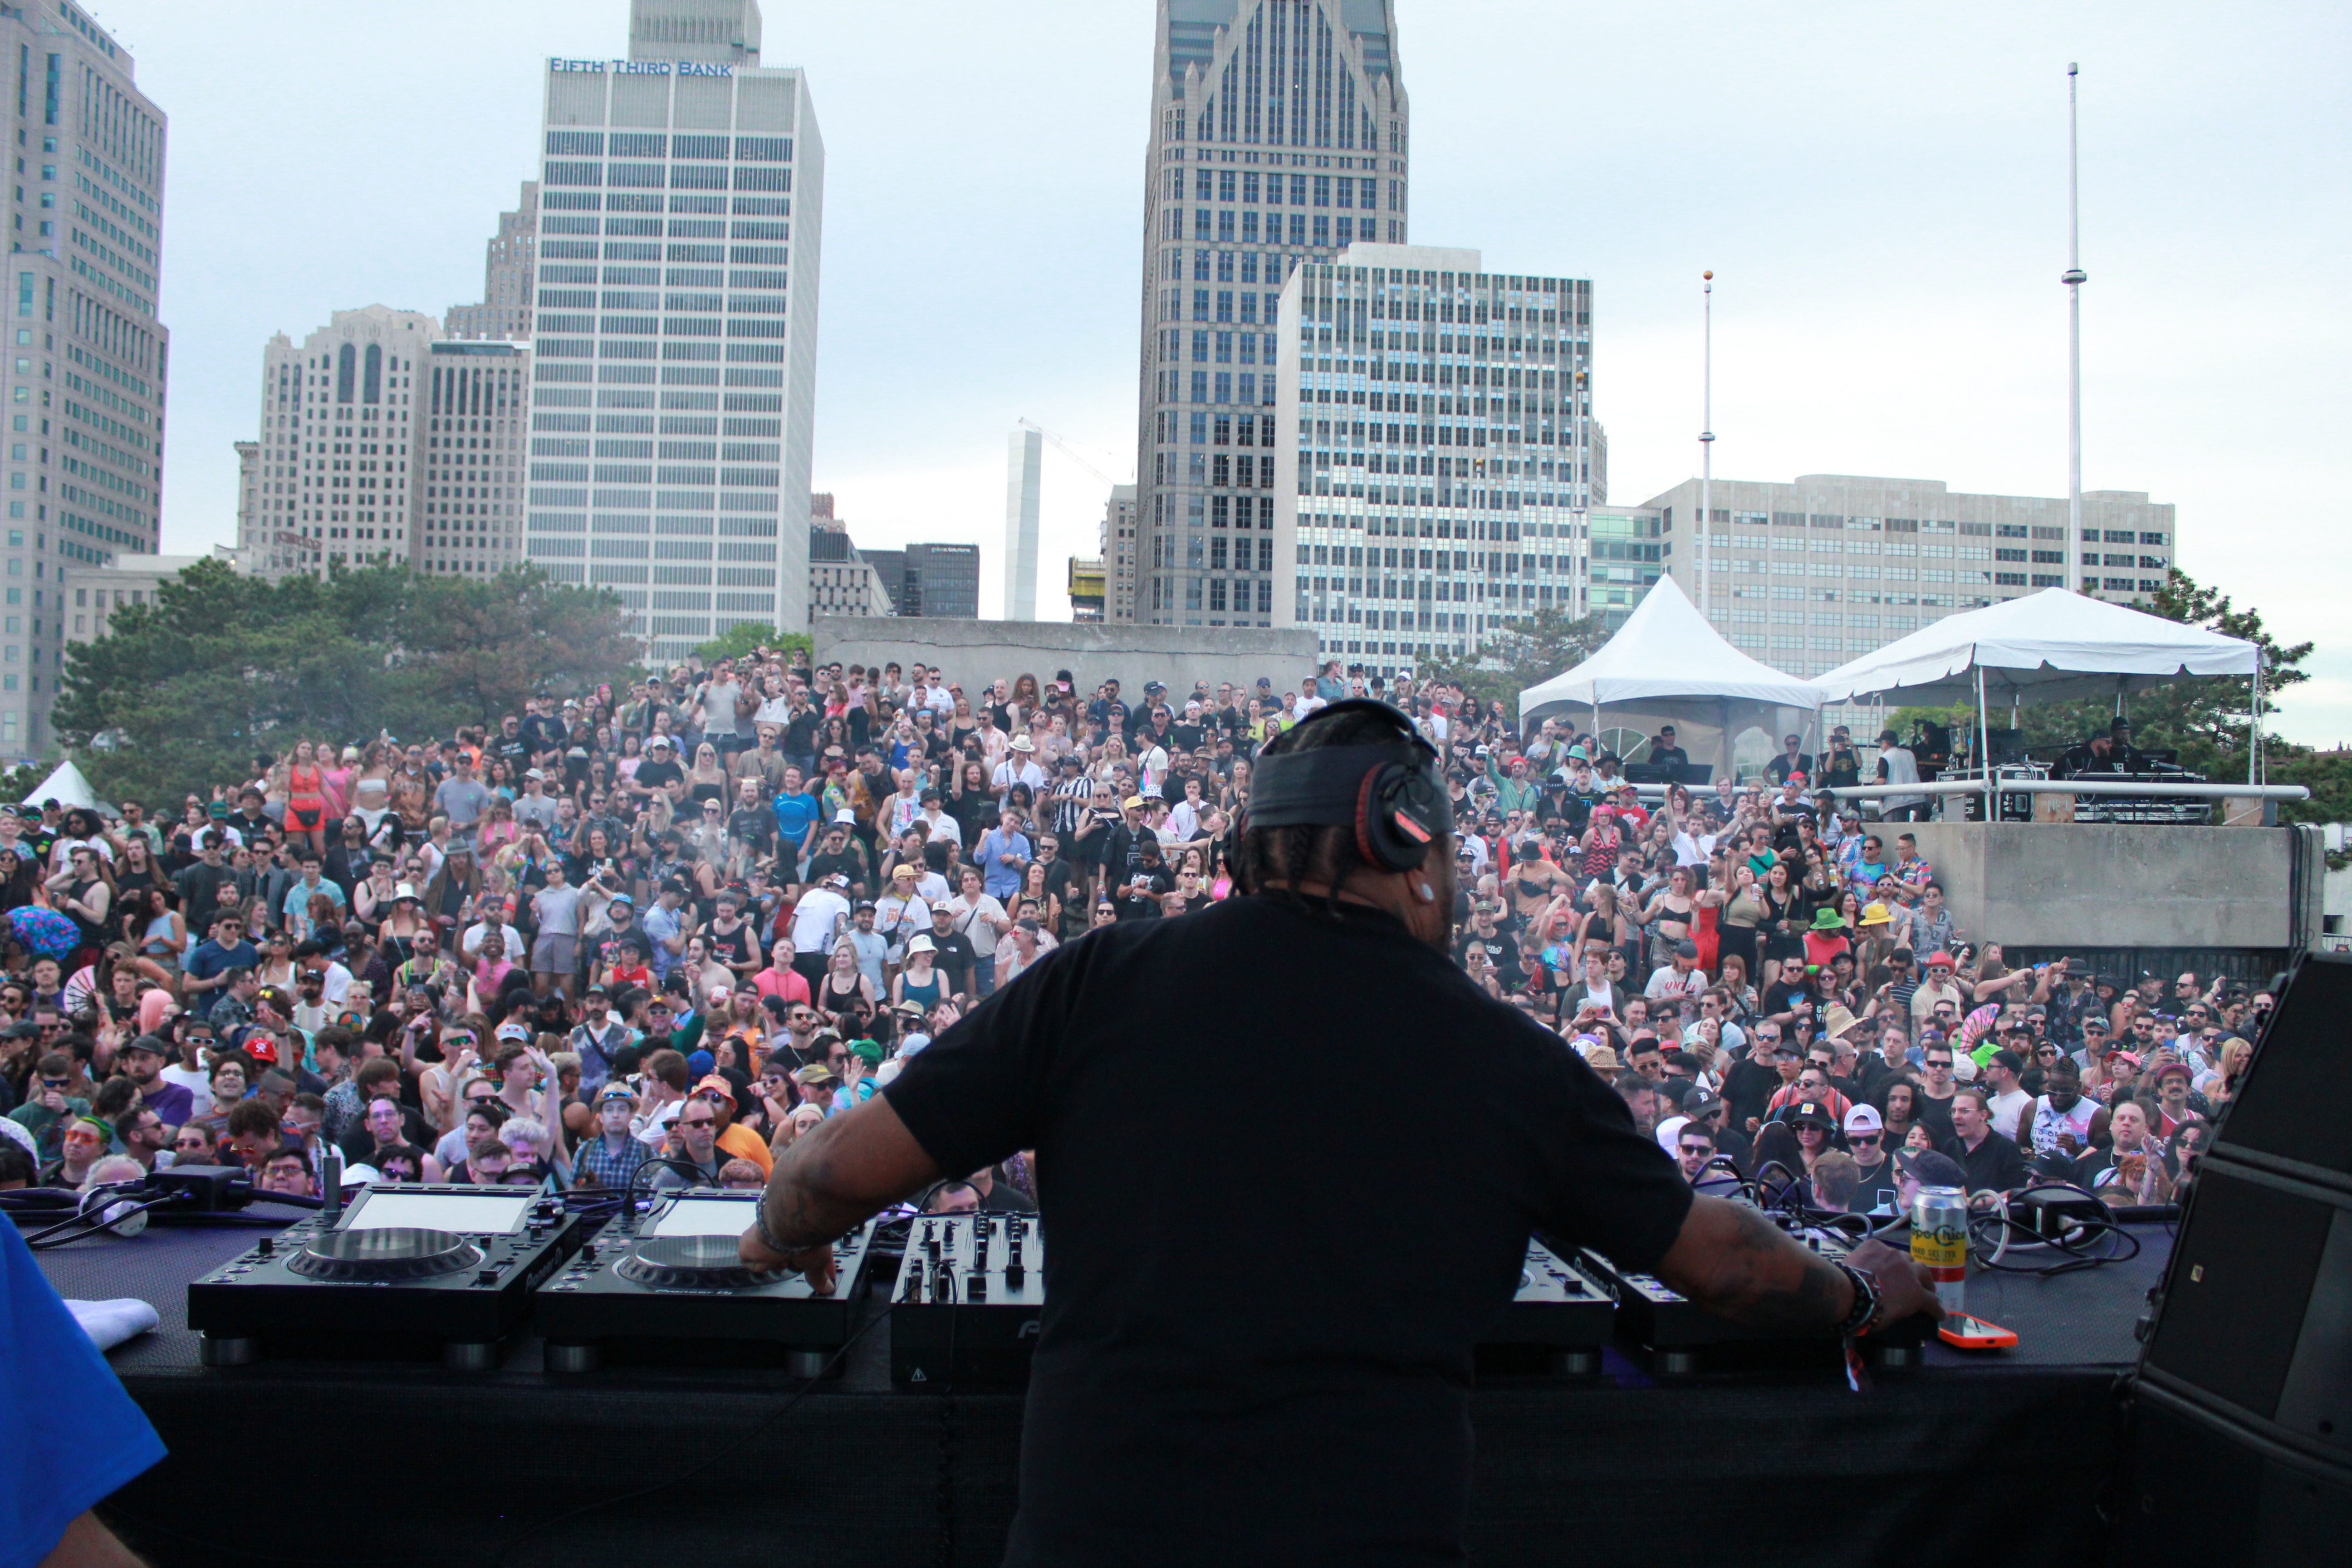 Derrick Carter on stage facing crowd at Movement 2023 electronic music festival in Detroit, MI, May 27, 2023.